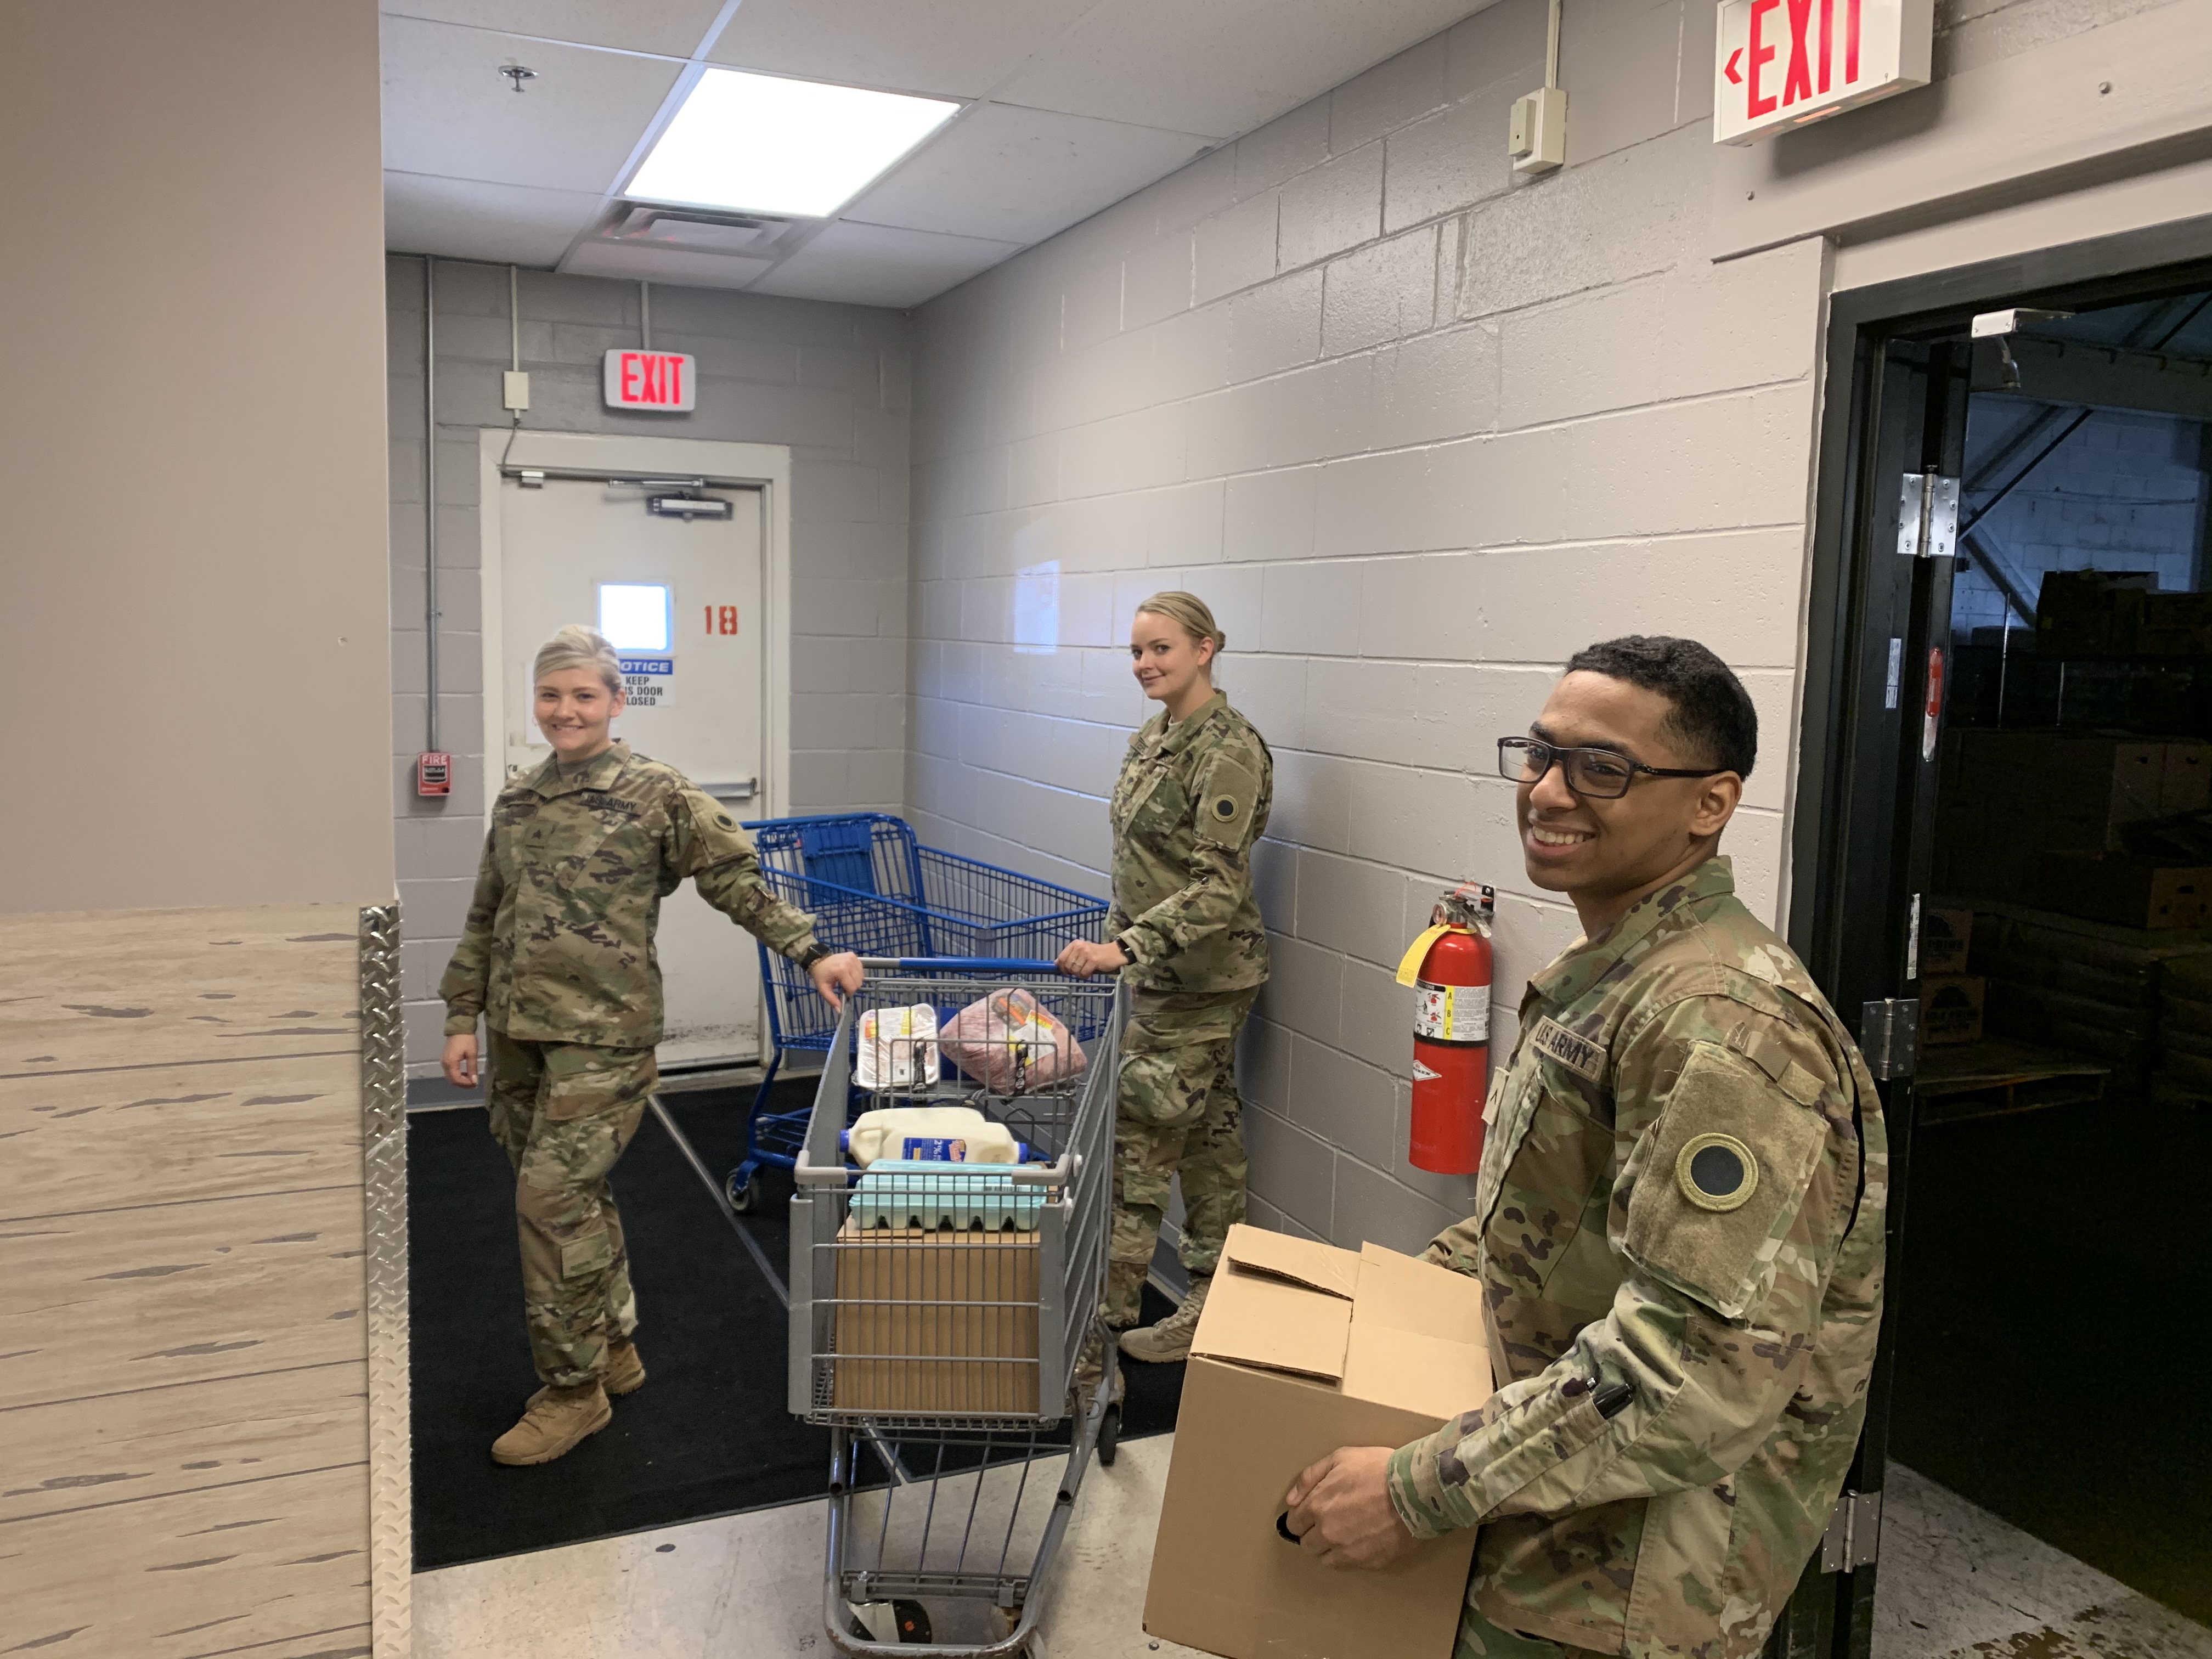 Soldiers load carts with boxes.